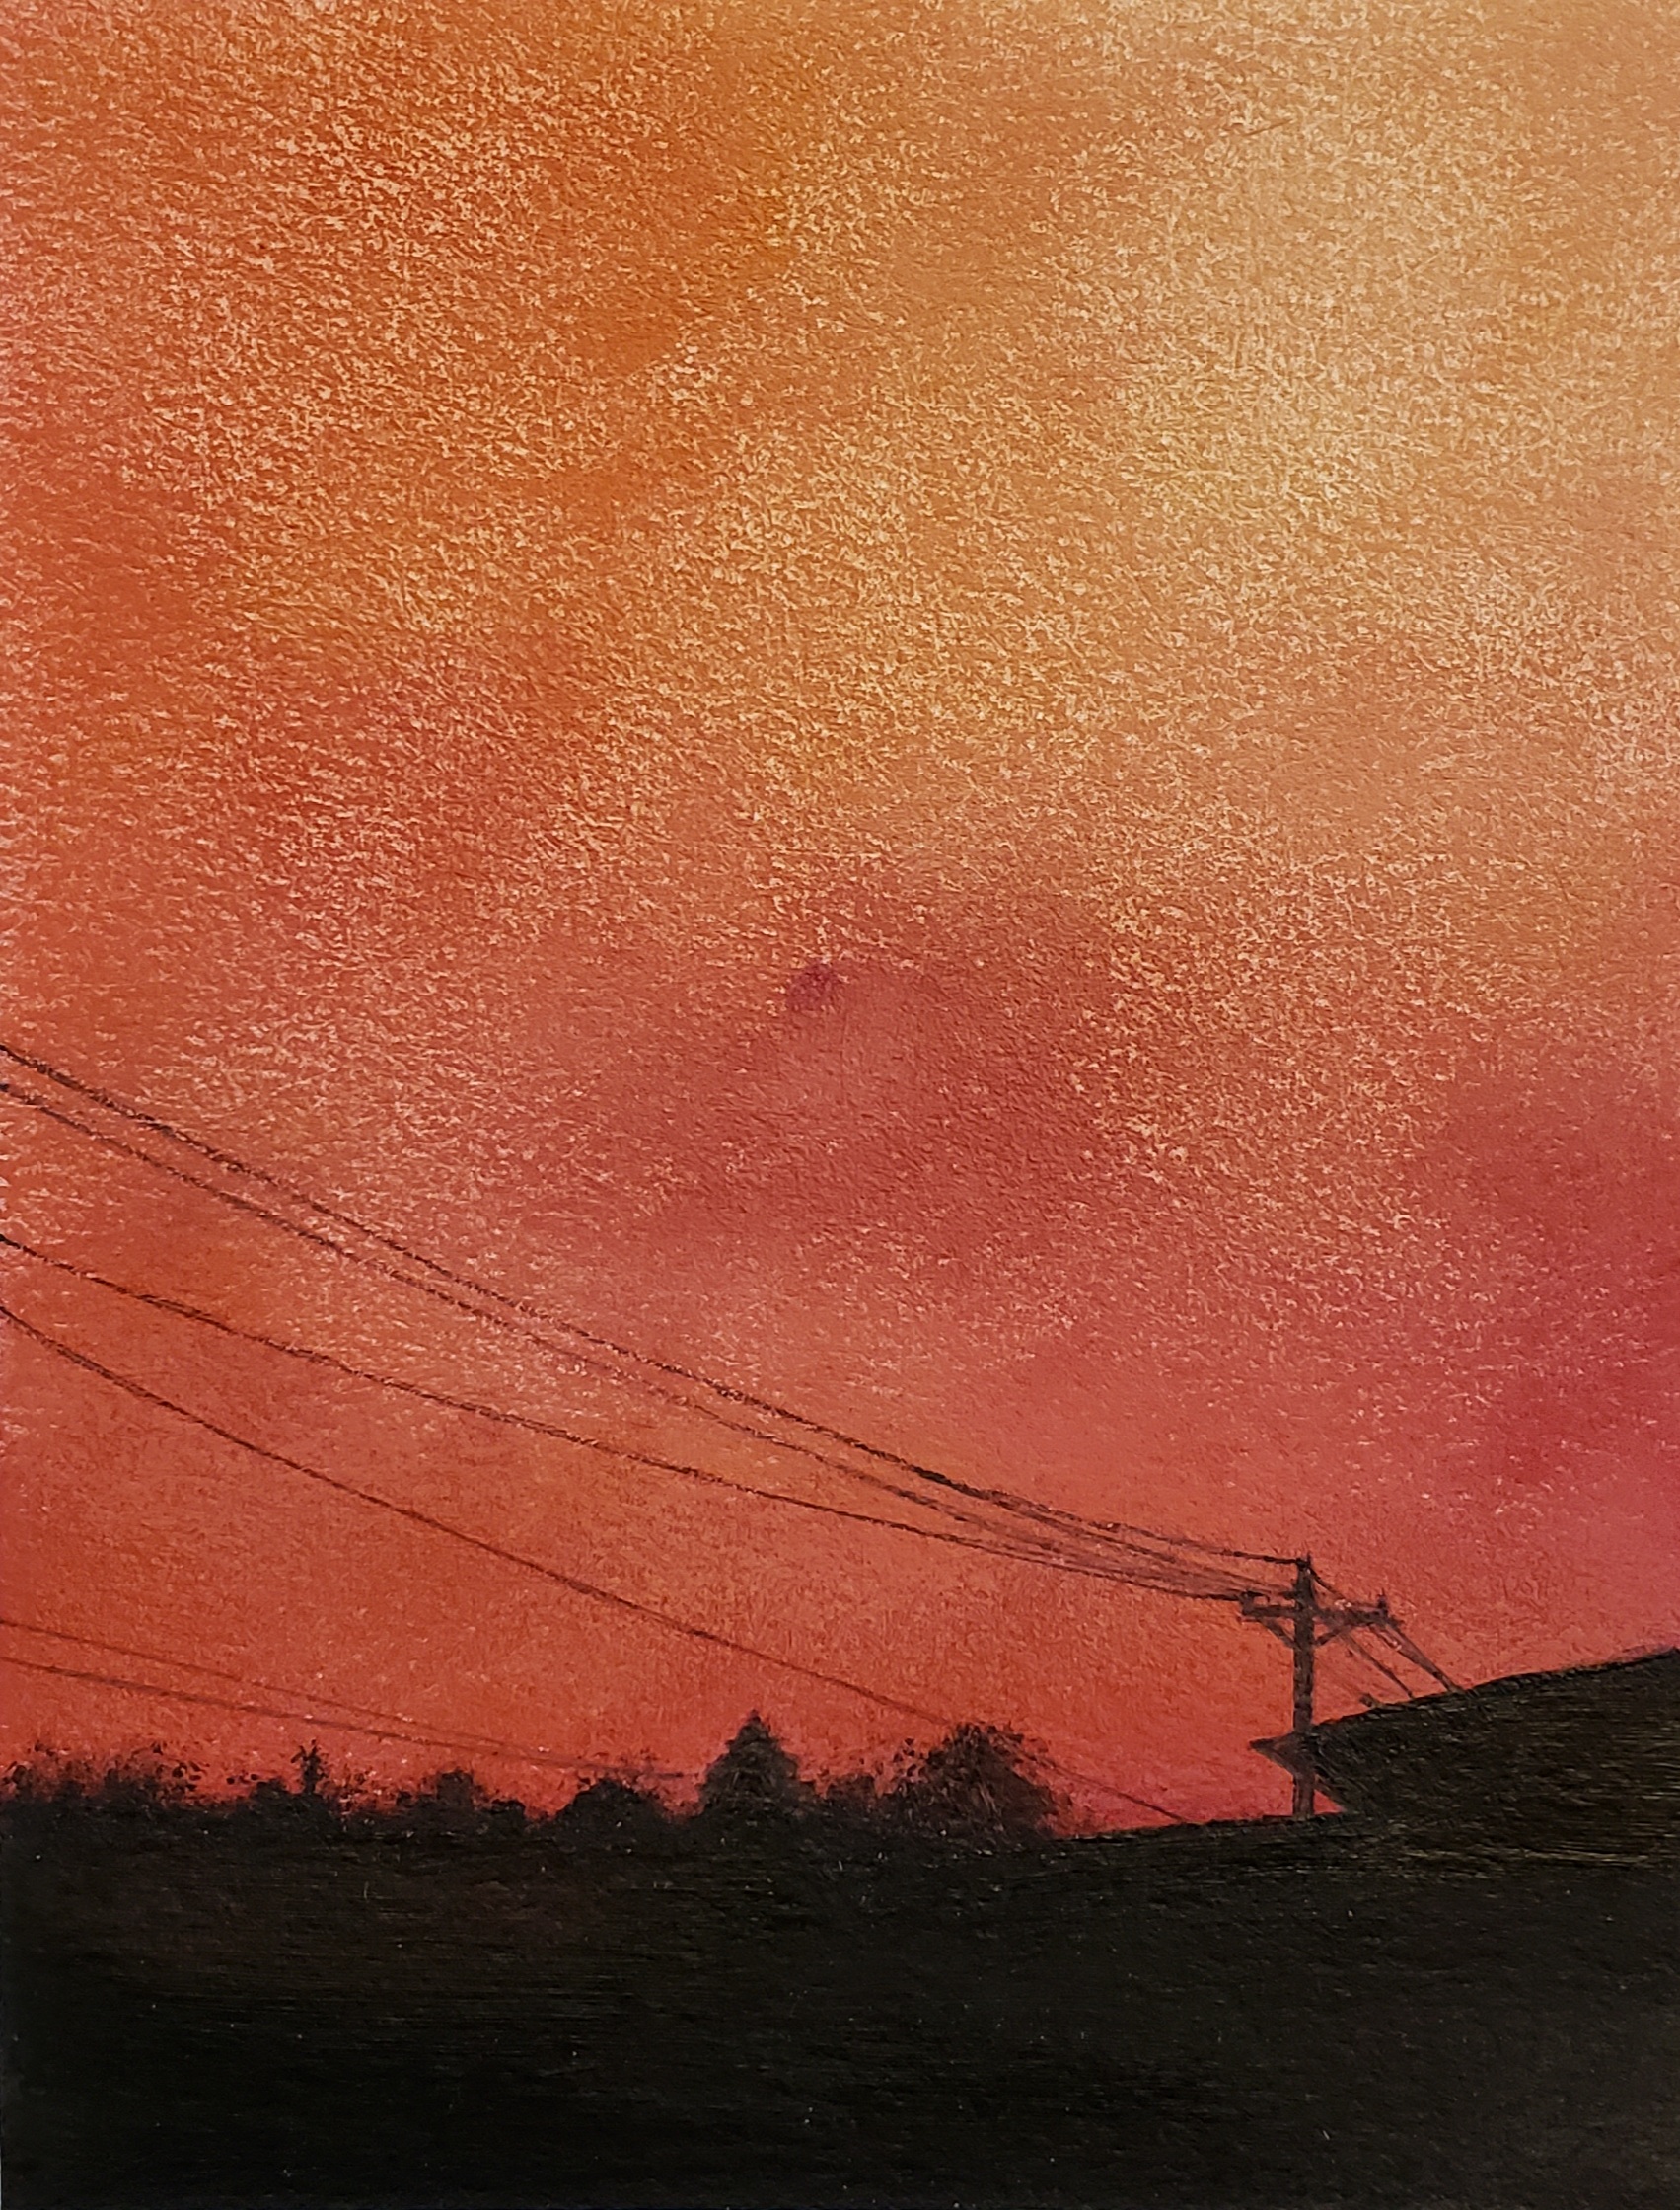 painting of the top corner of a building and power lines silhouetted against an orange sky